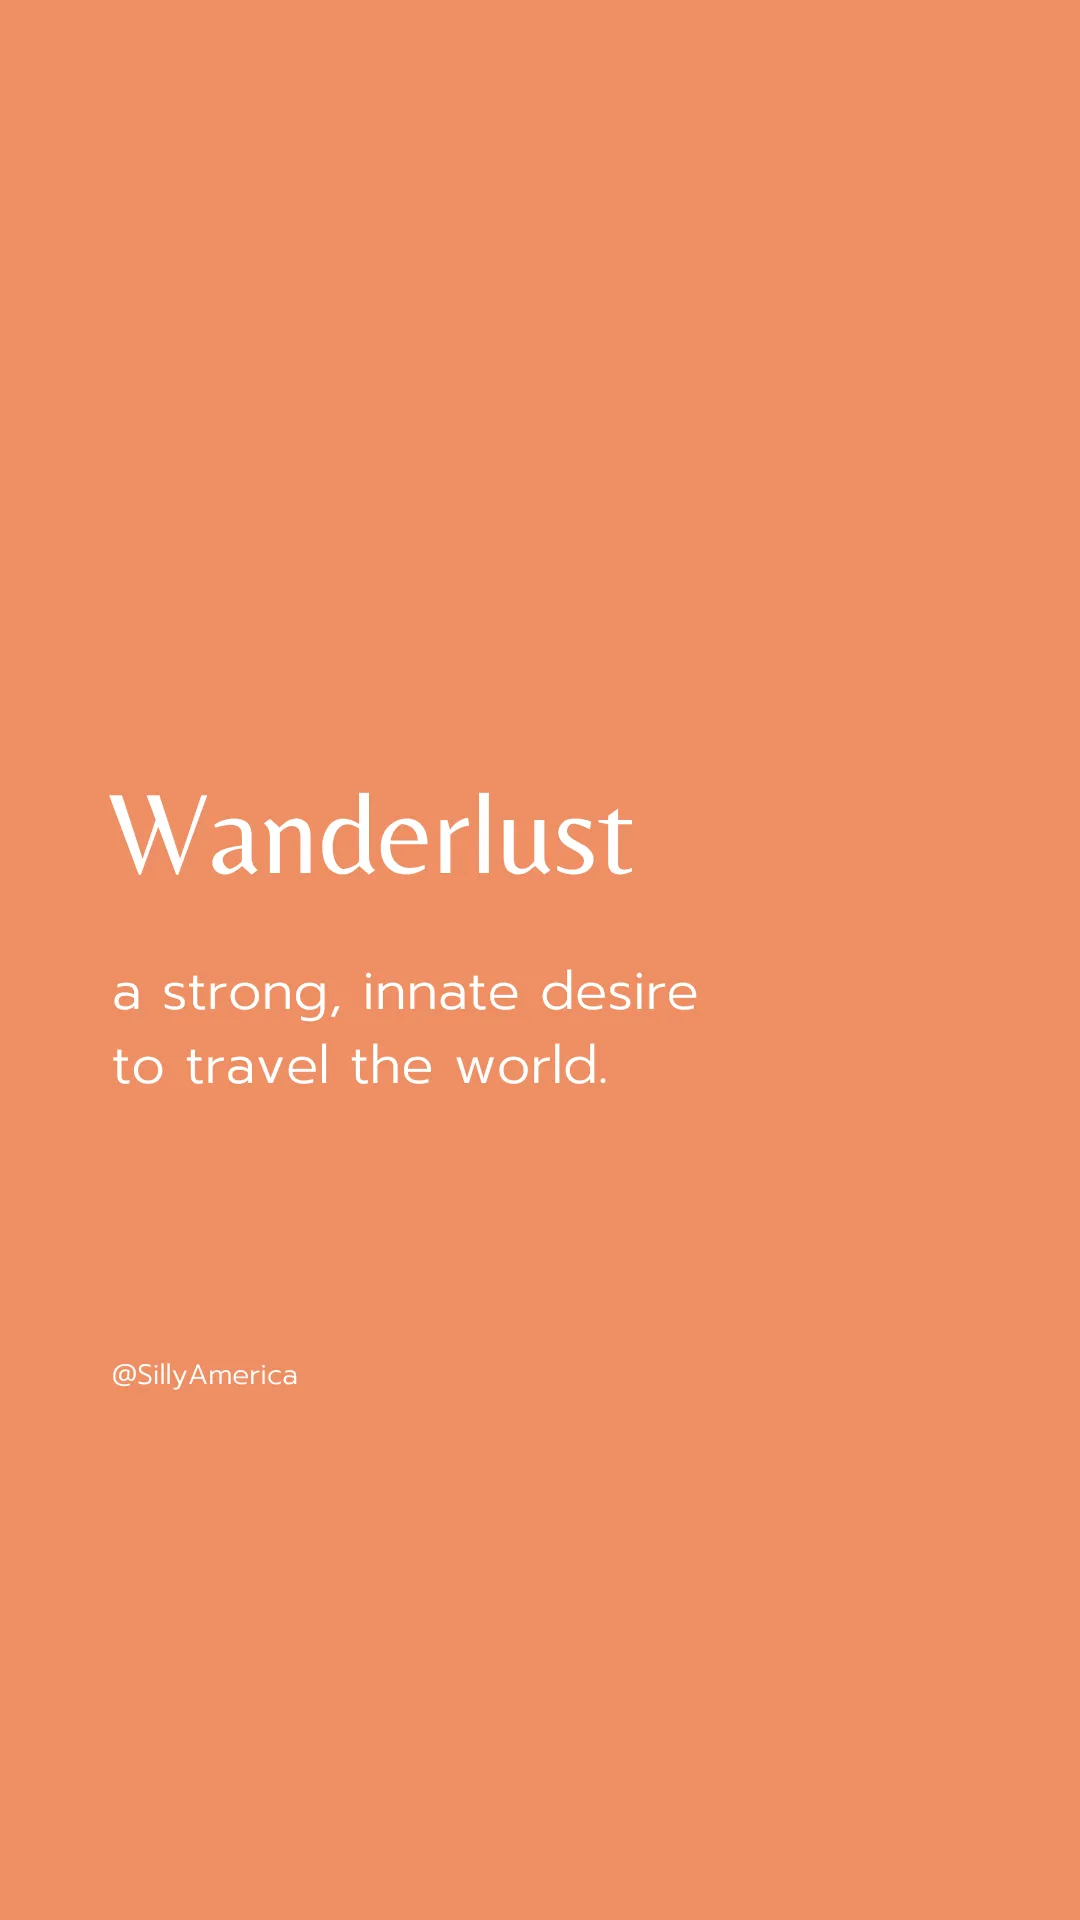 Wanderlust: a strong, innate desire to travel the world. - Road Trip Captions for Instagram